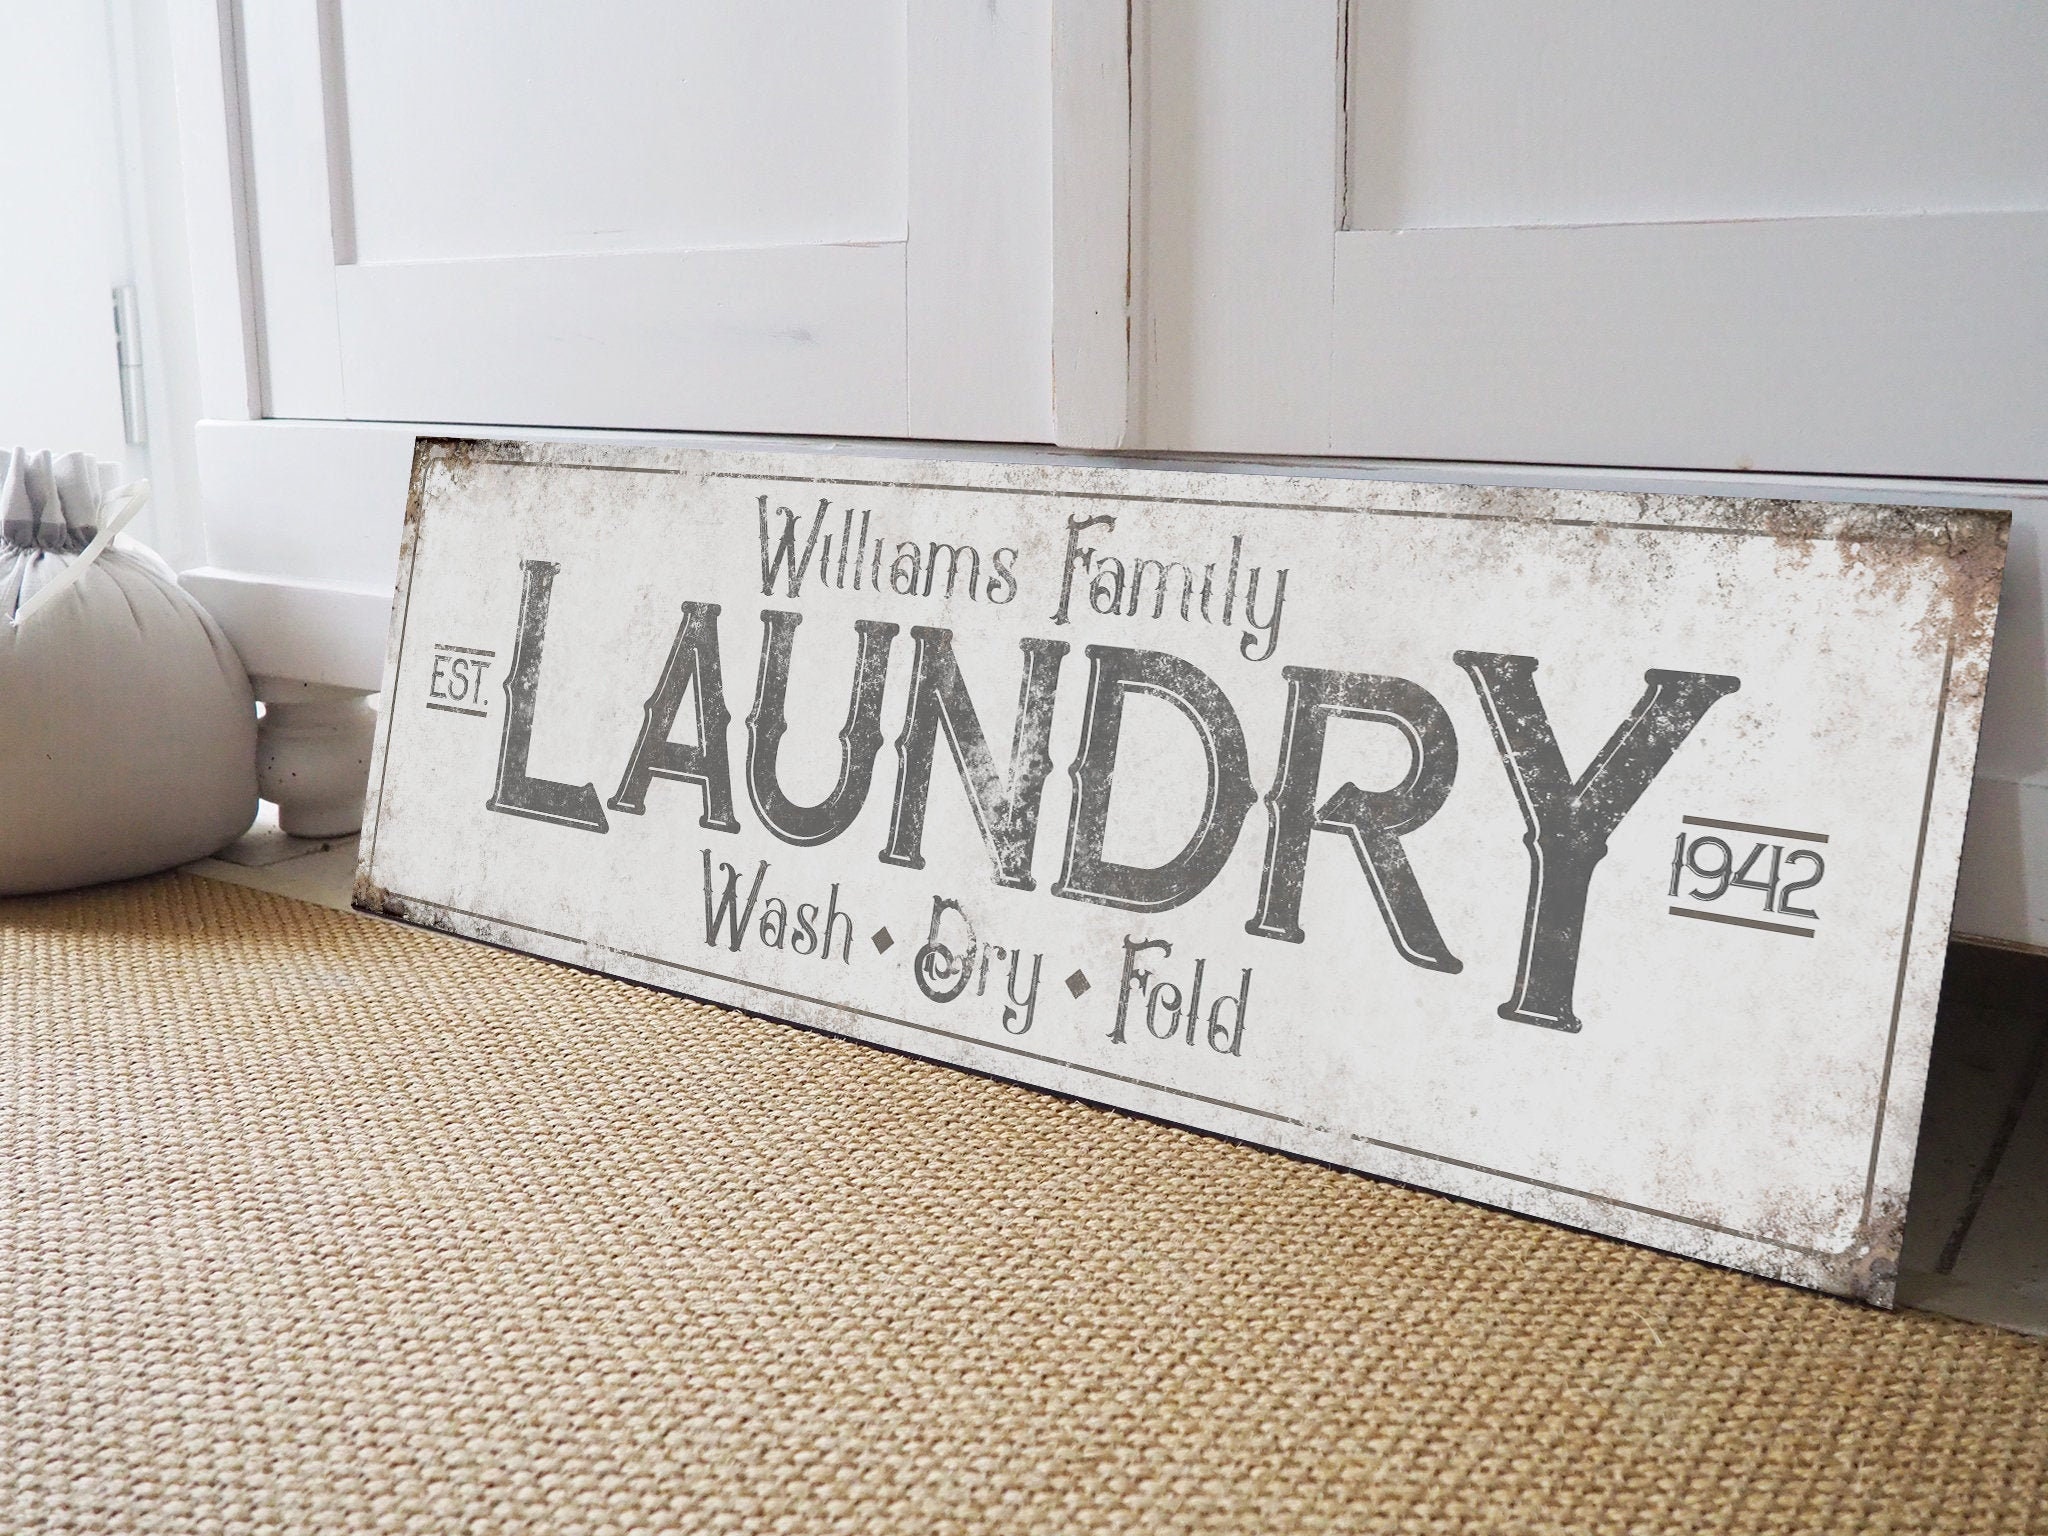 Custom 3x5 Engraved Business Suite SignLaundry Room Decorative Personalized 